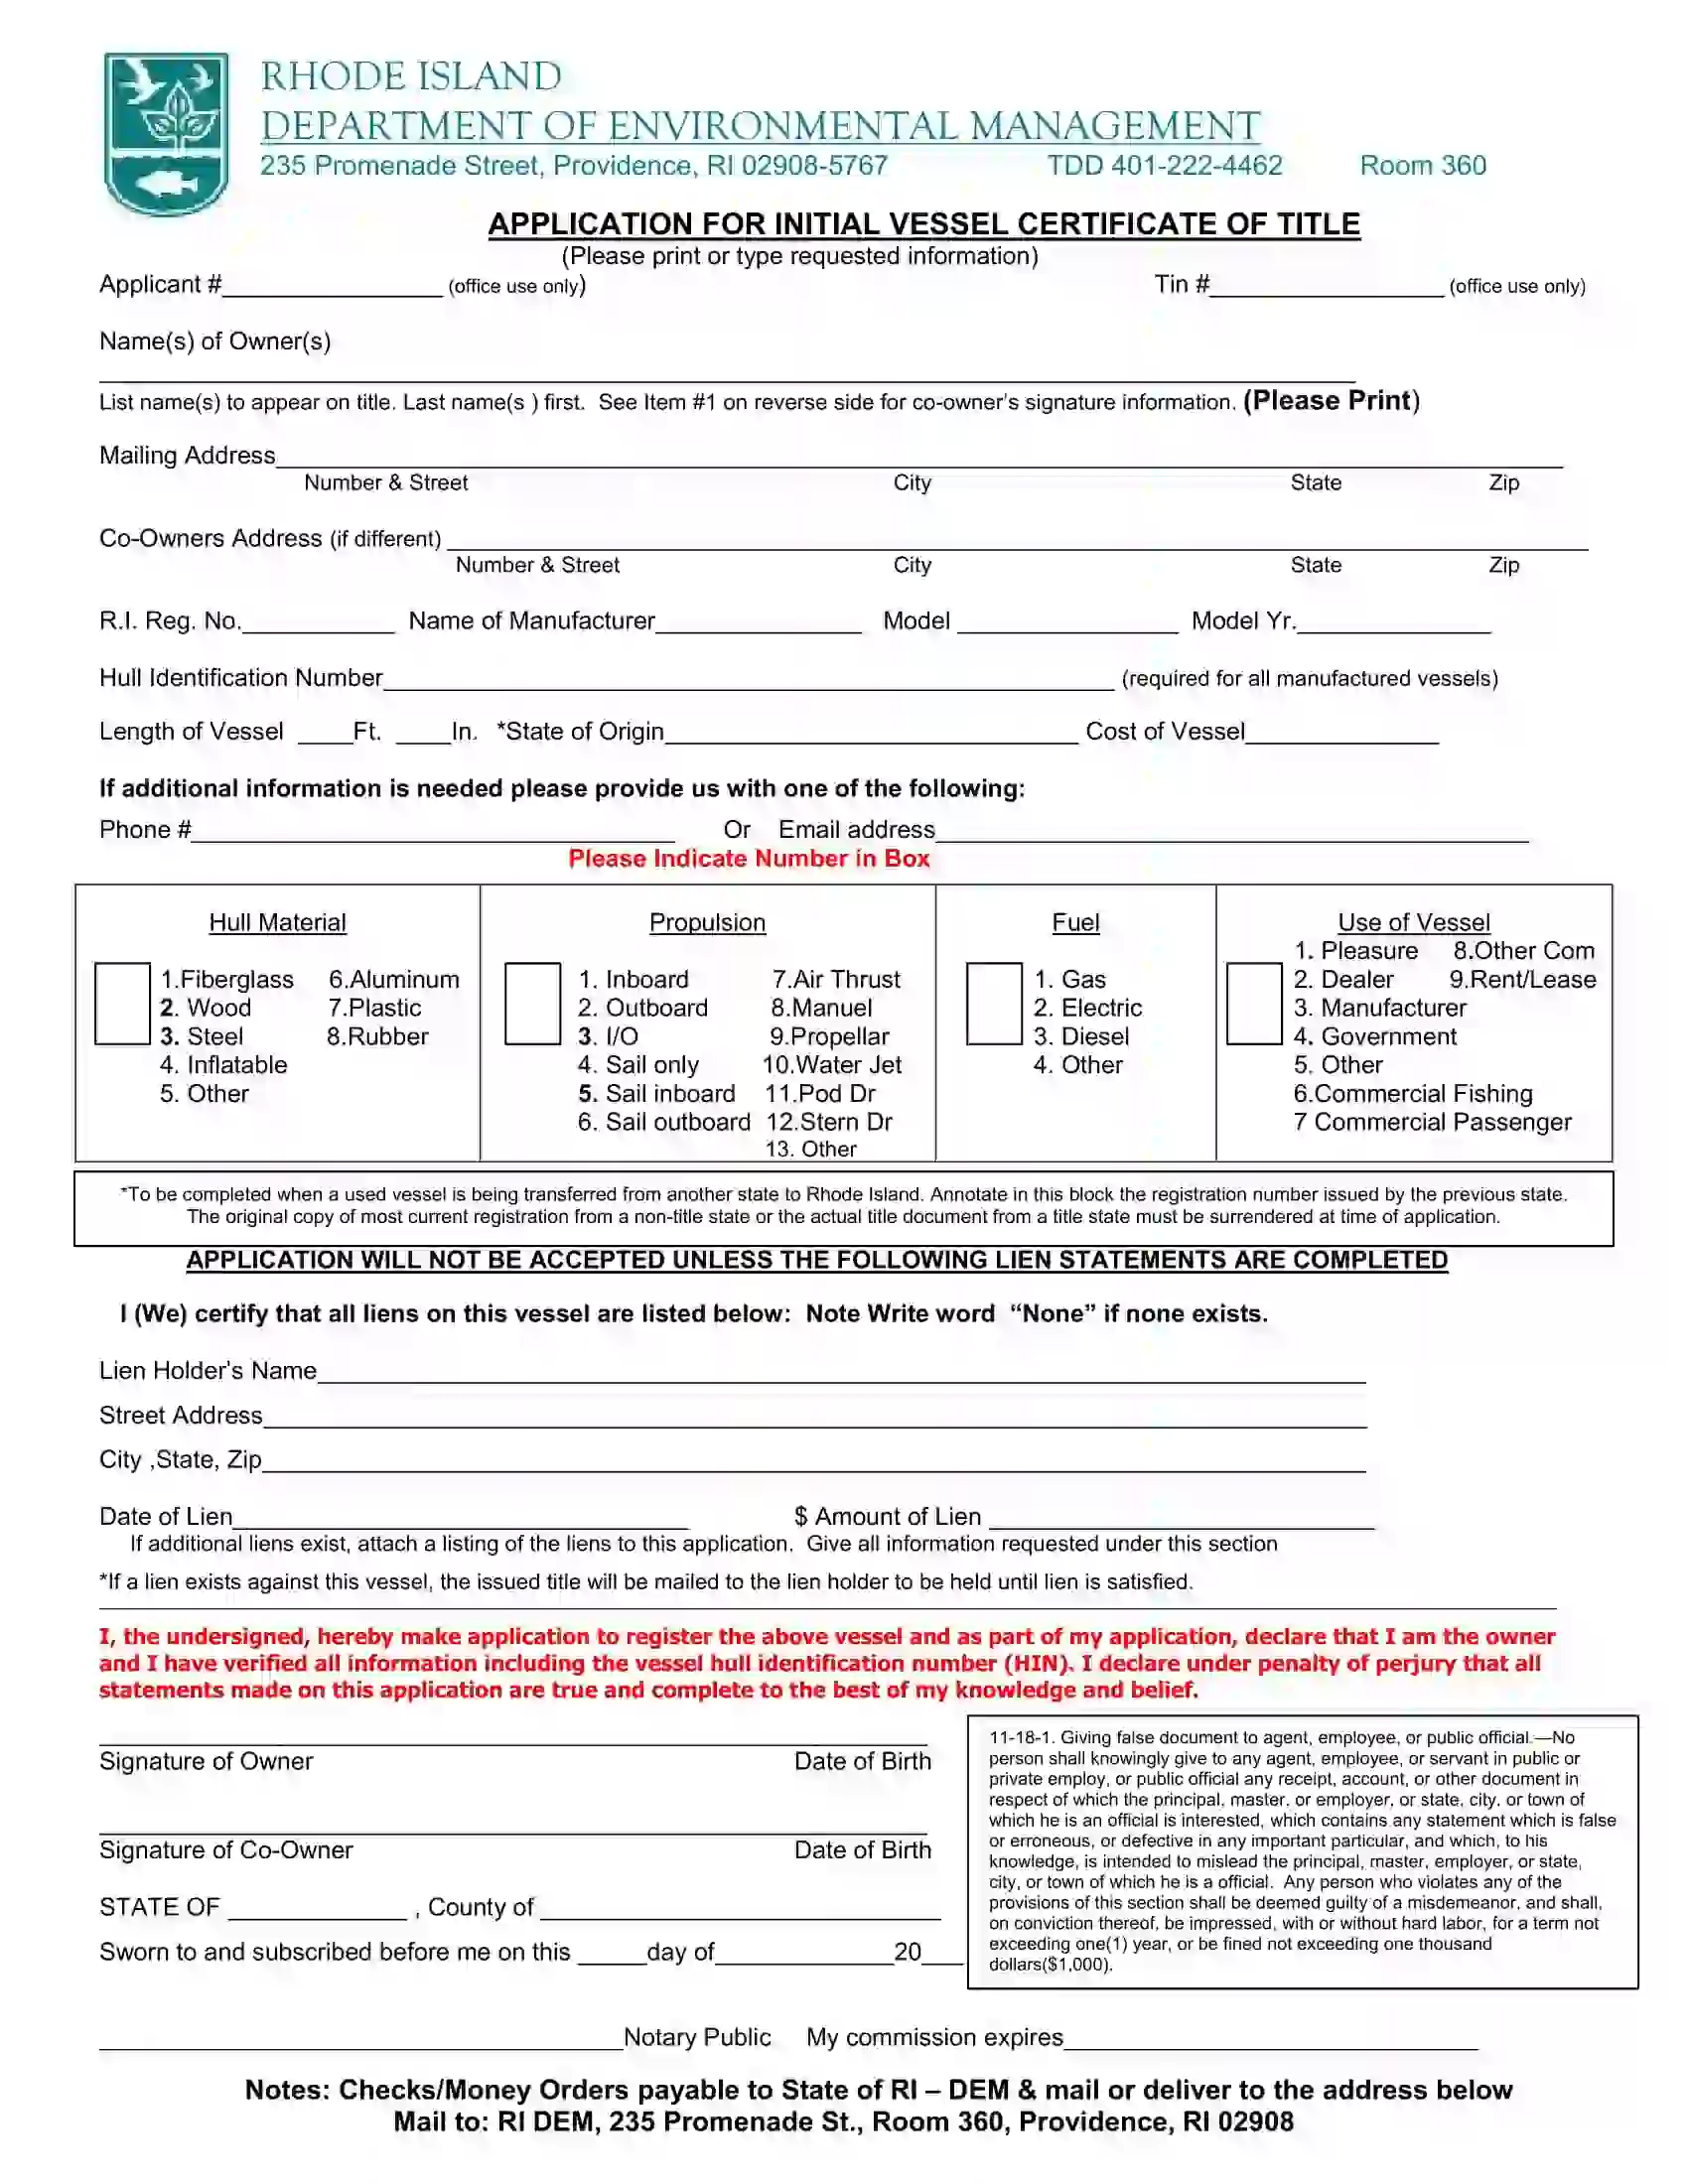 (Vessel) Application for Initial Vessel Certificate of Title